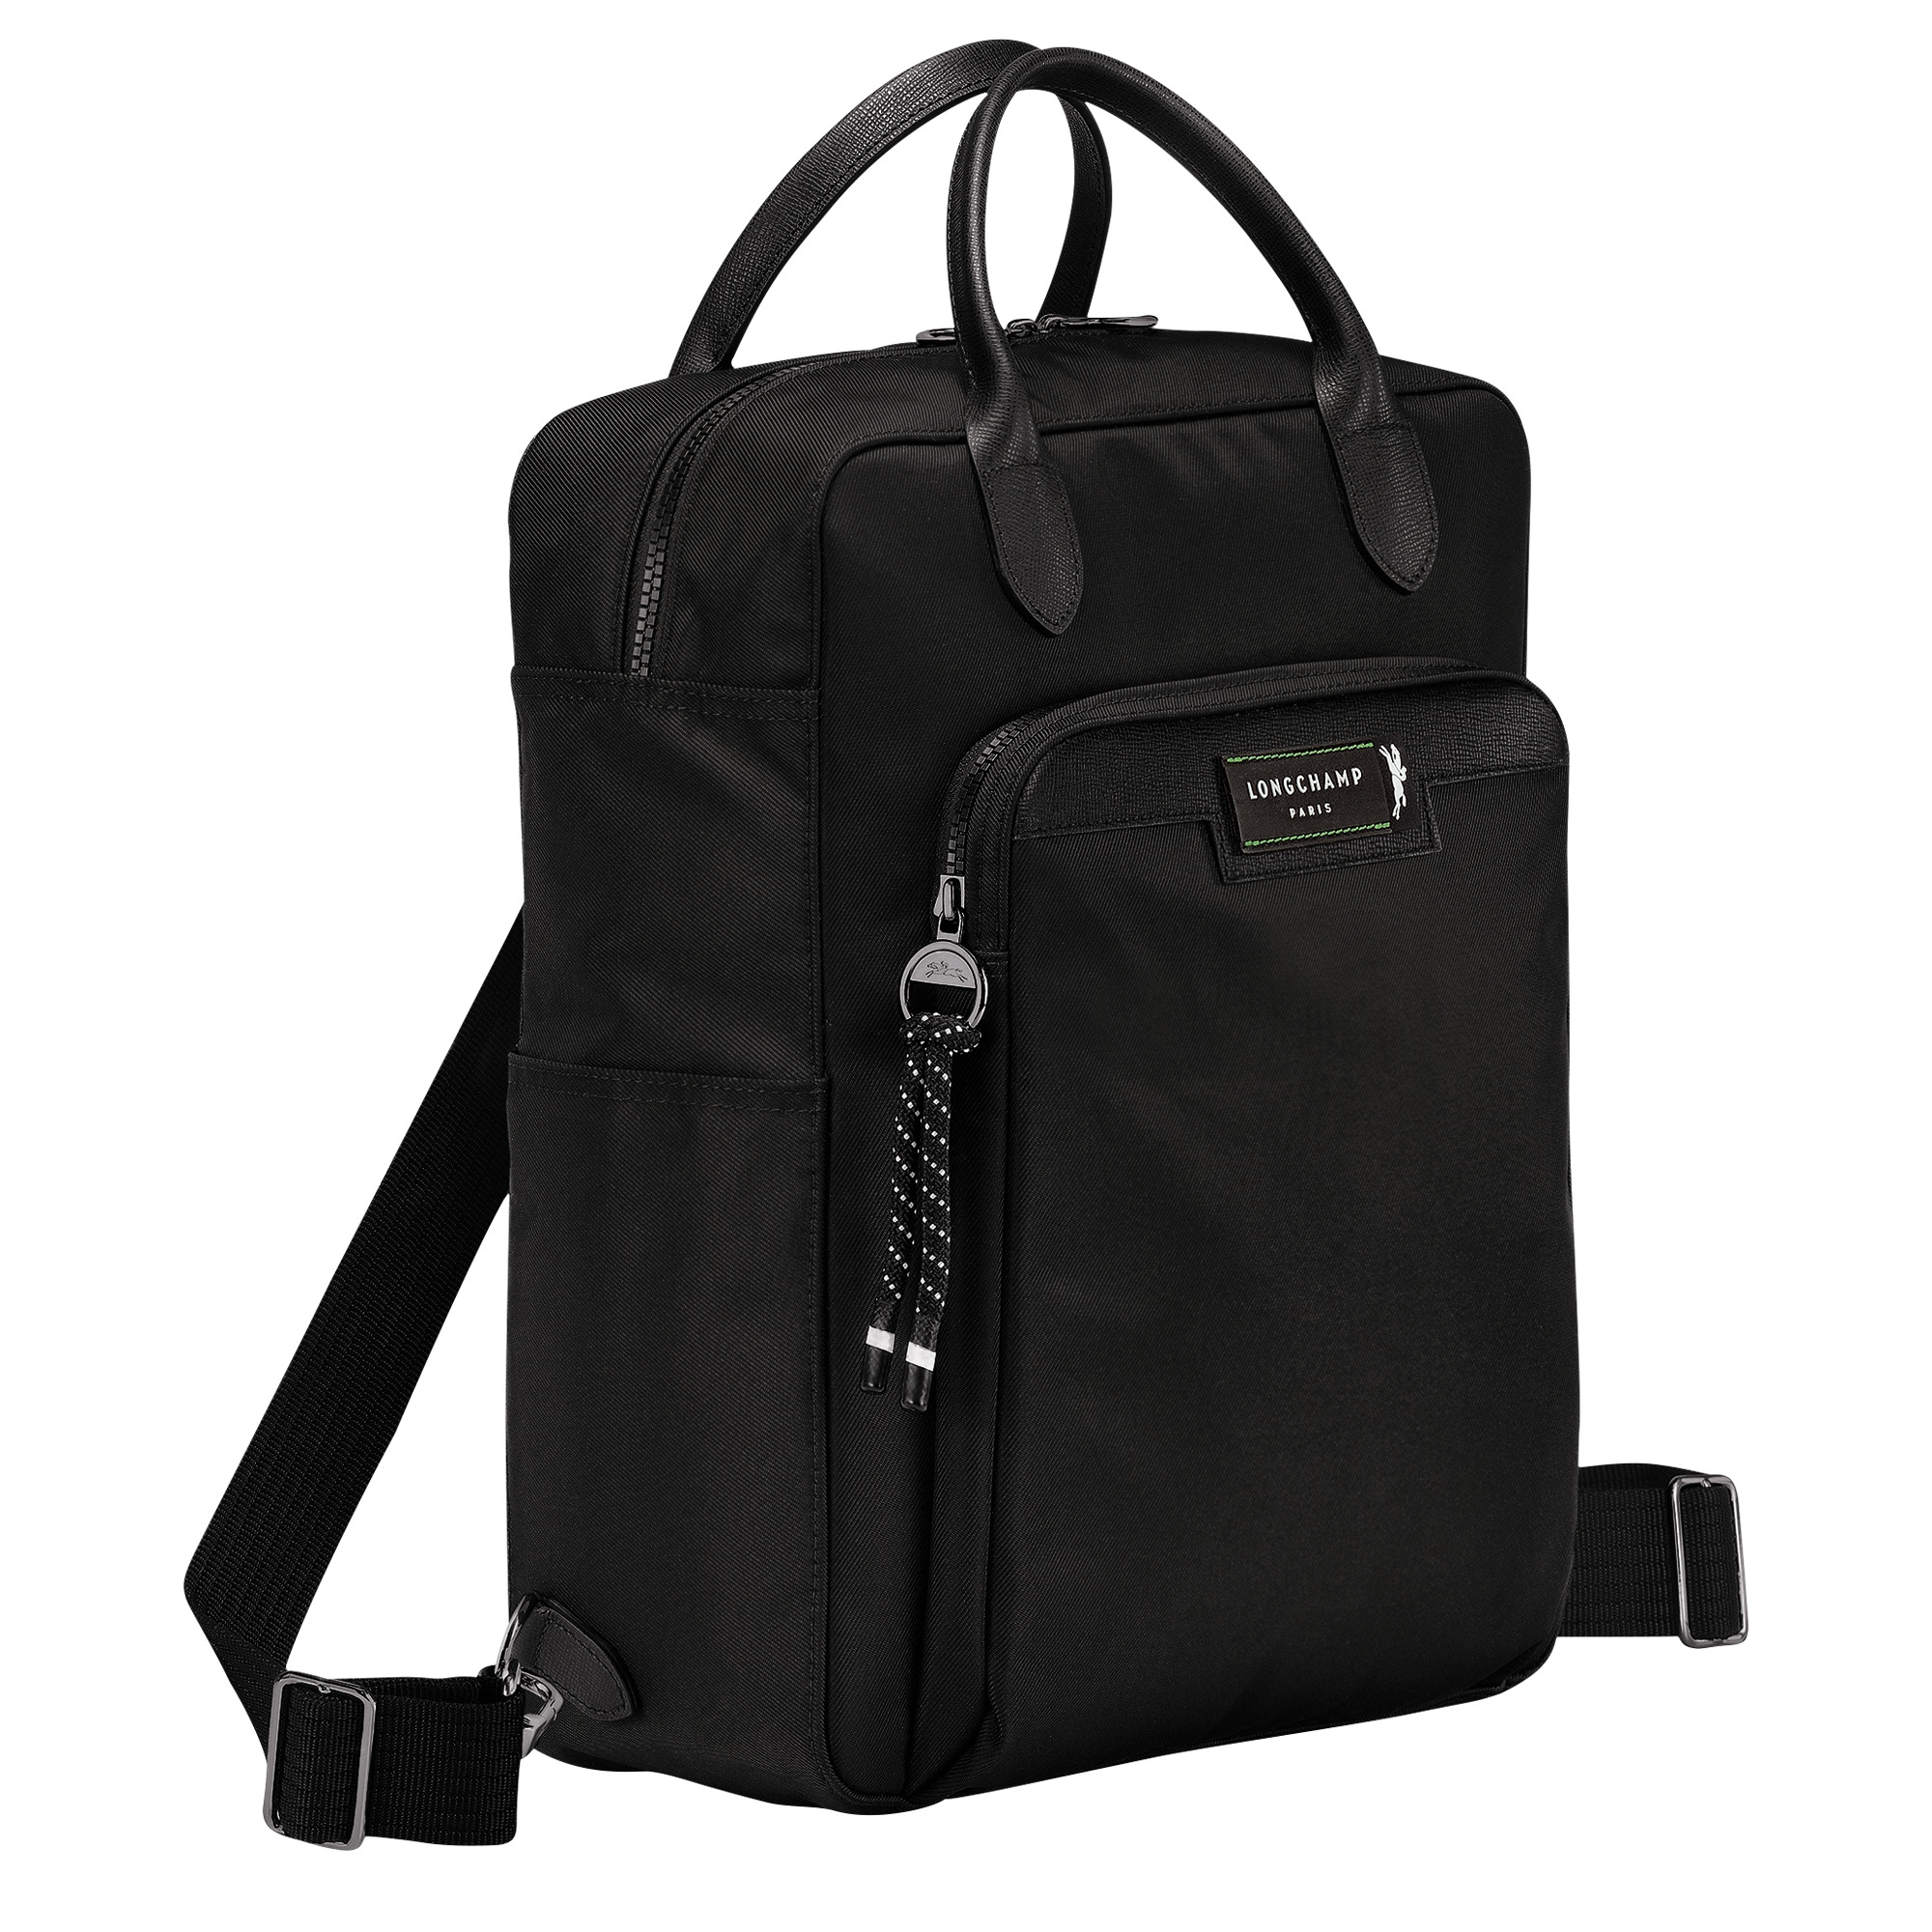 Le Pliage Energy M Backpack Black - Recycled canvas - 3